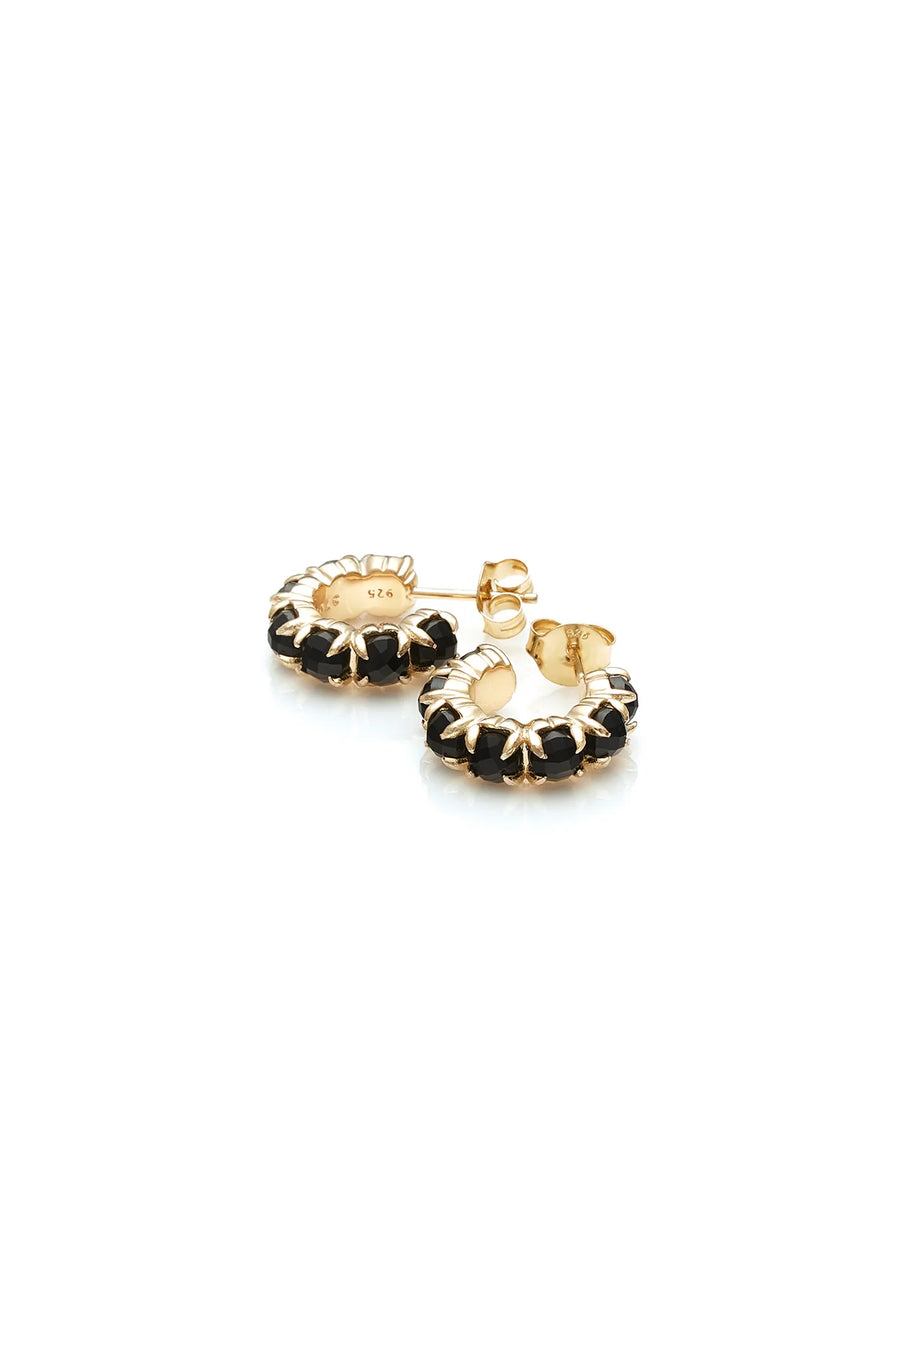 Stolen Girlfriend's Club | Halo Cluster Earrings - Gold Plated